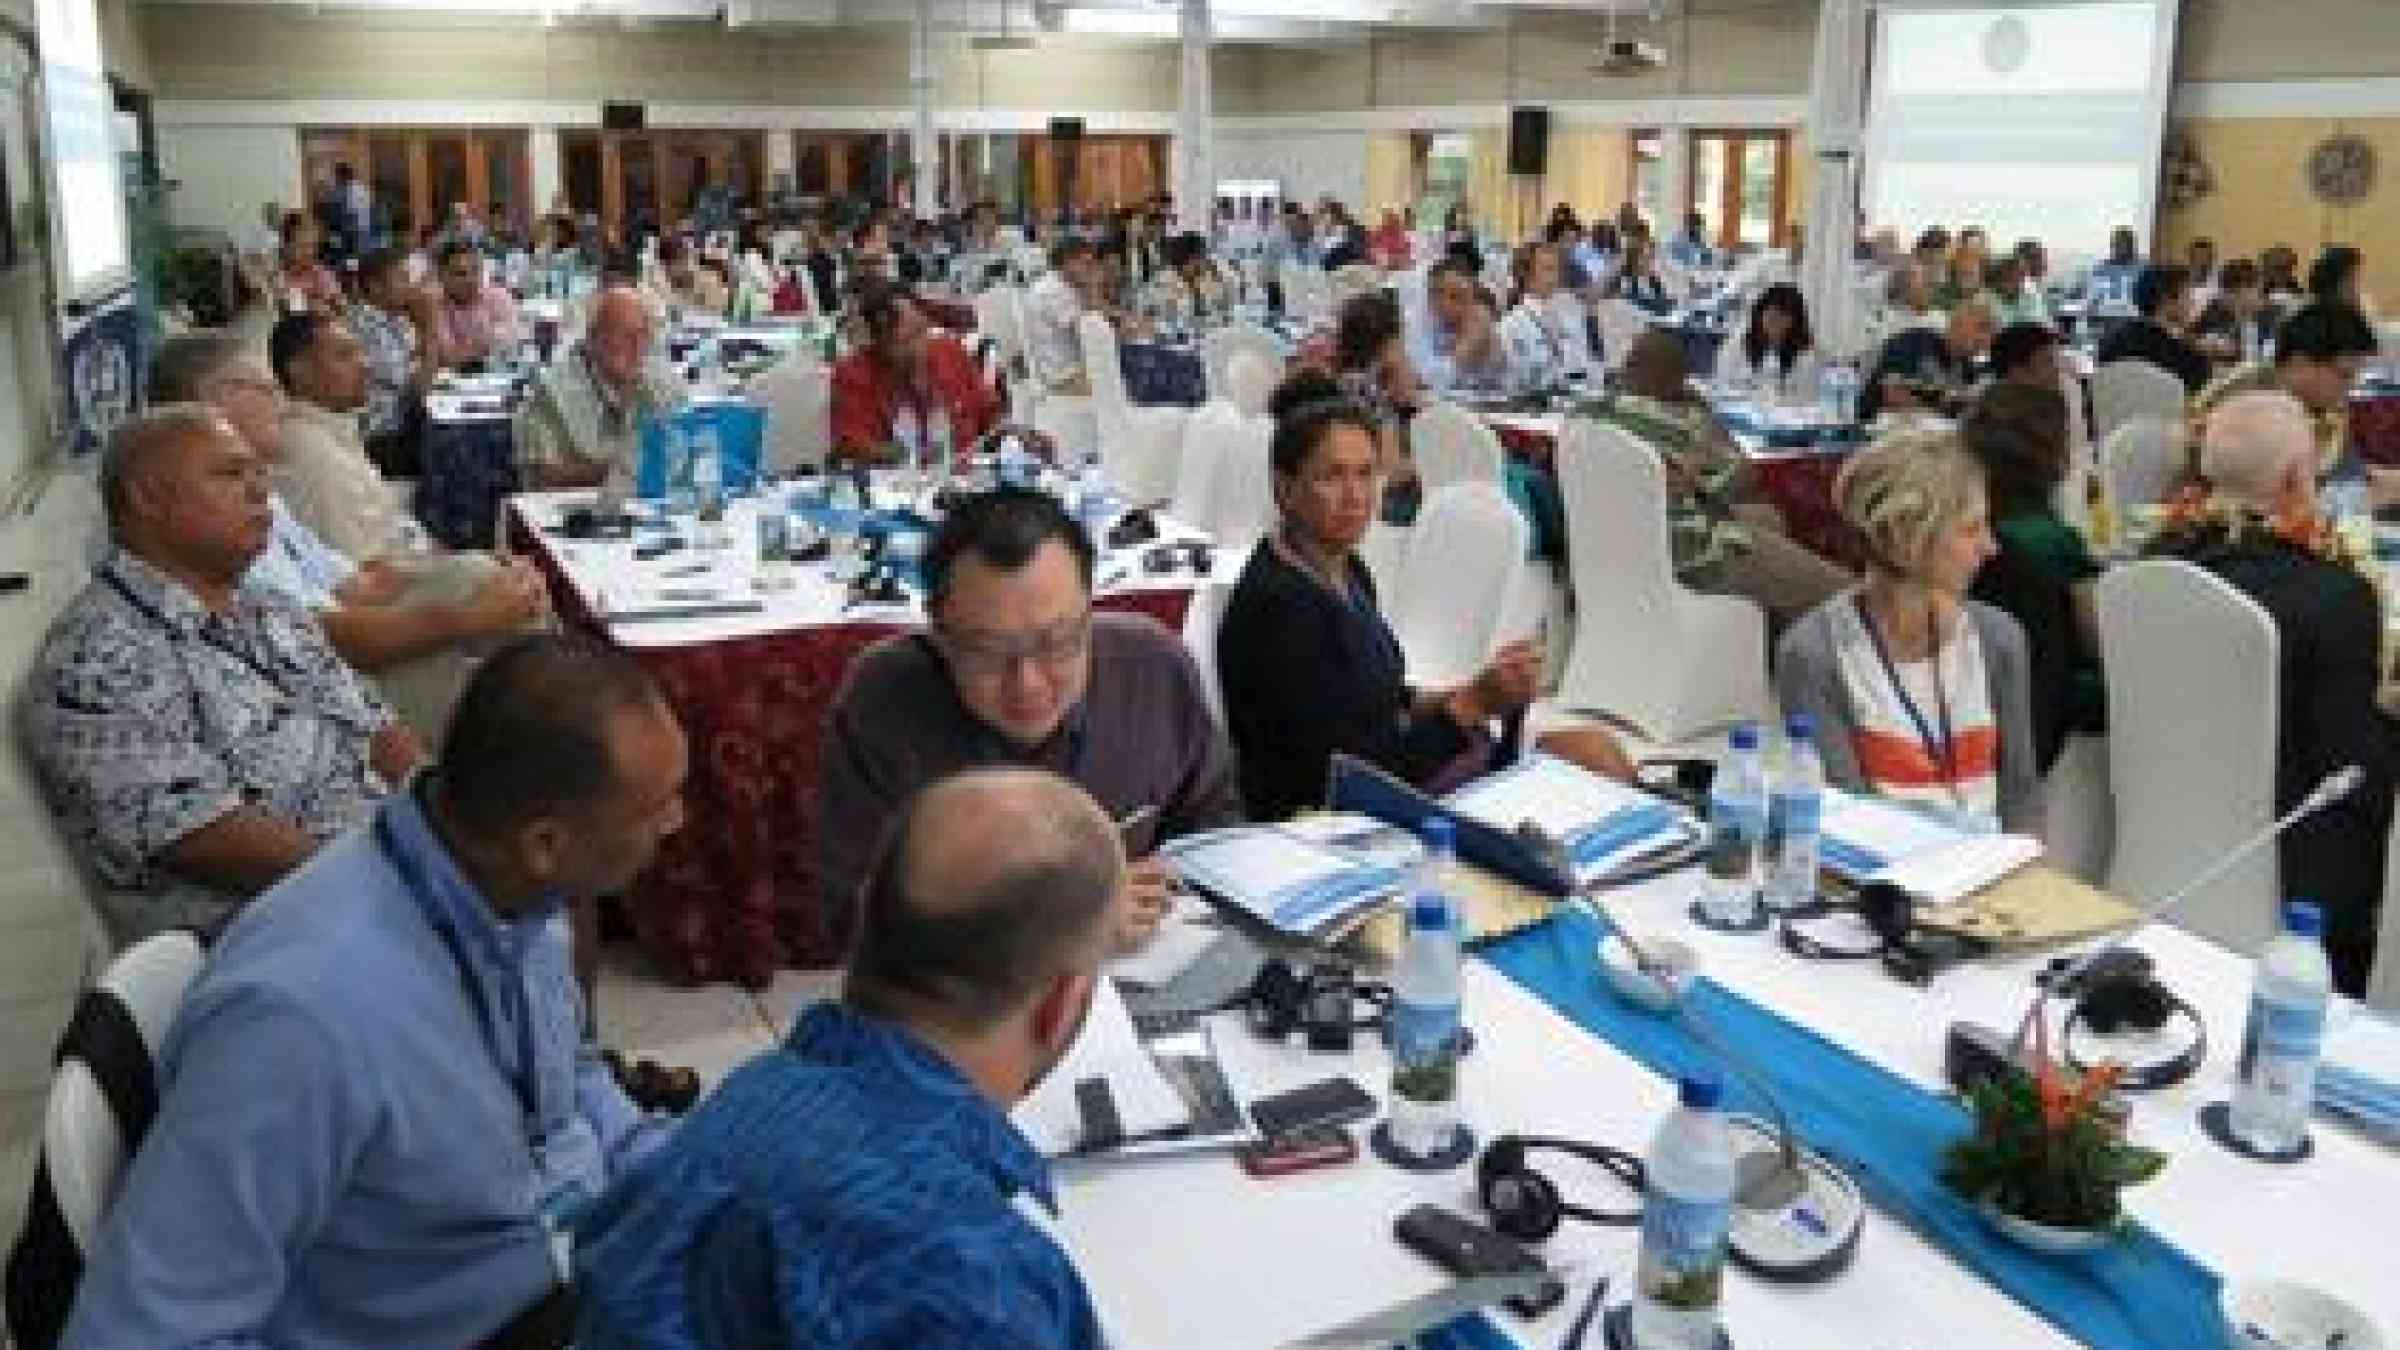 Delegates at the 6th Pacific Platform finalise the Meeting Statement ahead of the close of the three-day forum. (Photo: UNISDR)